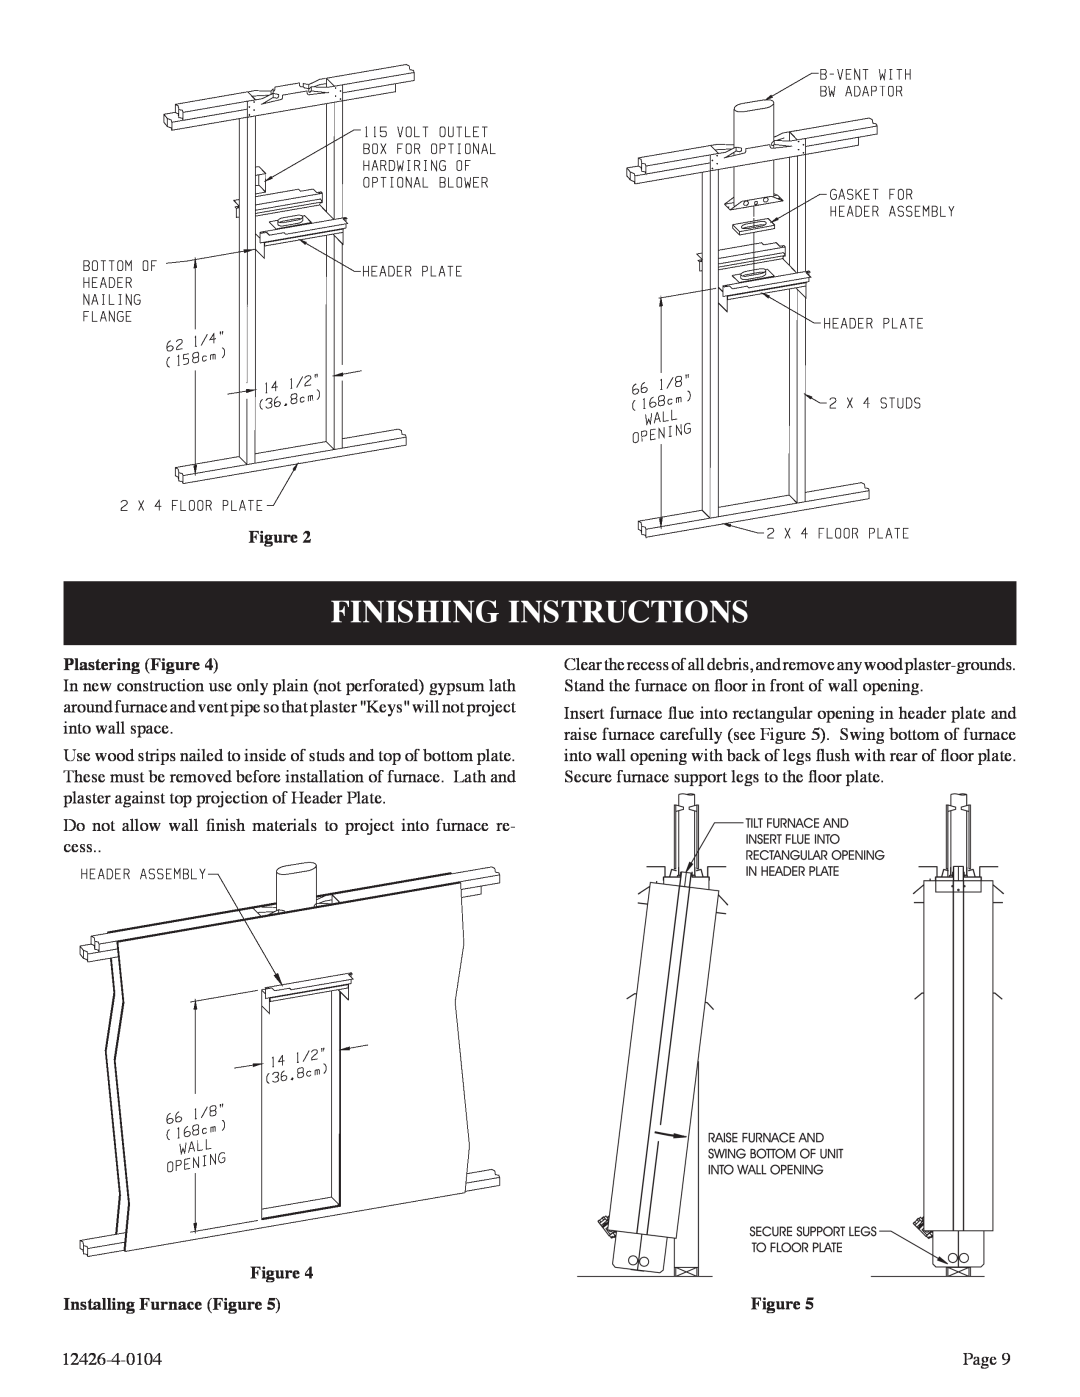 Empire Comfort Systems RB), GWT-50-2 Finishing Instructions, Plastering Figure, Installing Furnace Figure 